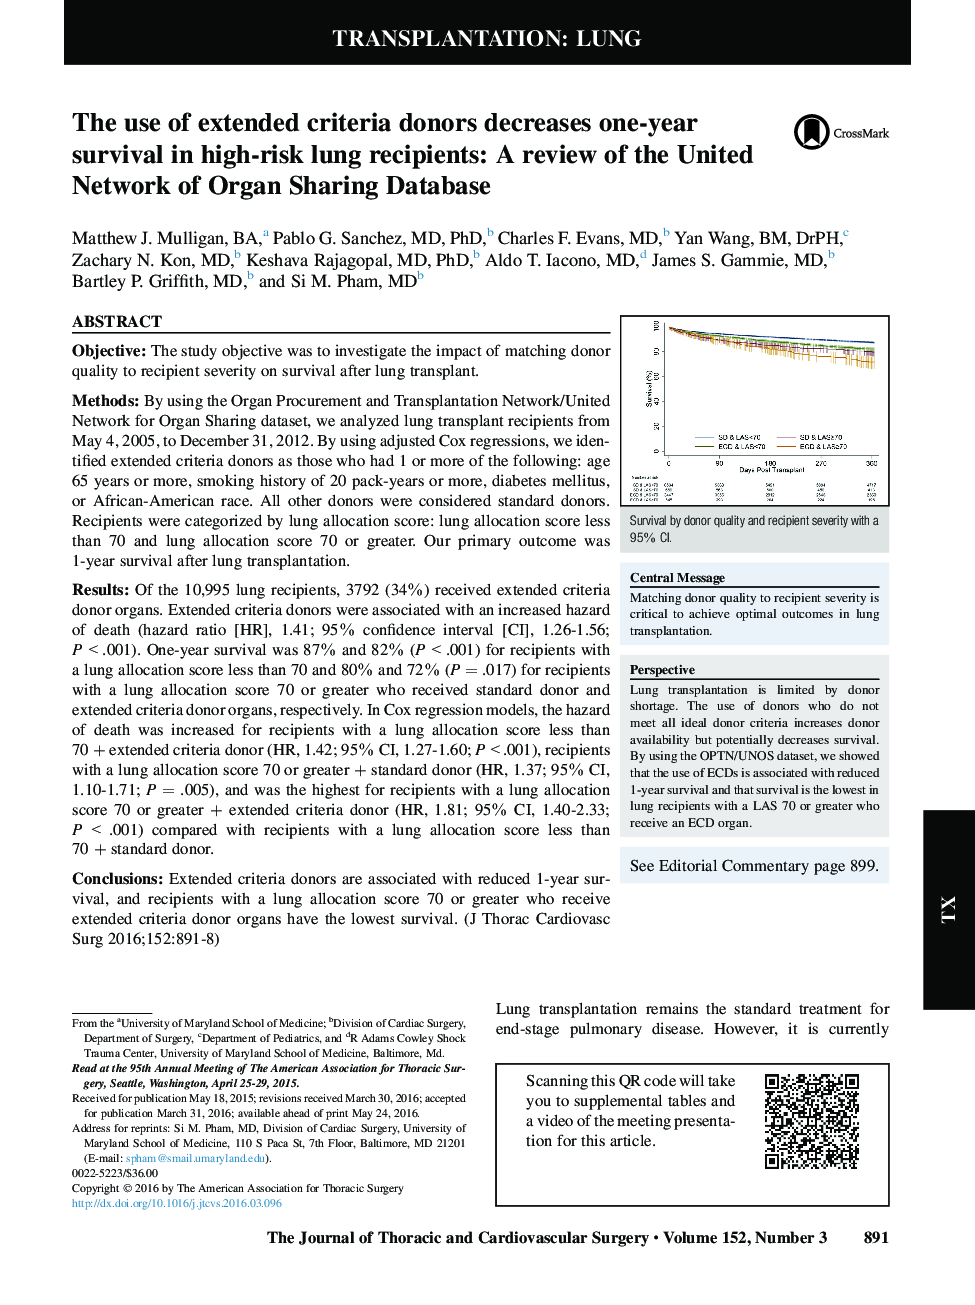 The use of extended criteria donors decreases one-year survival in high-risk lung recipients: A review of the United Network of Organ Sharing Database